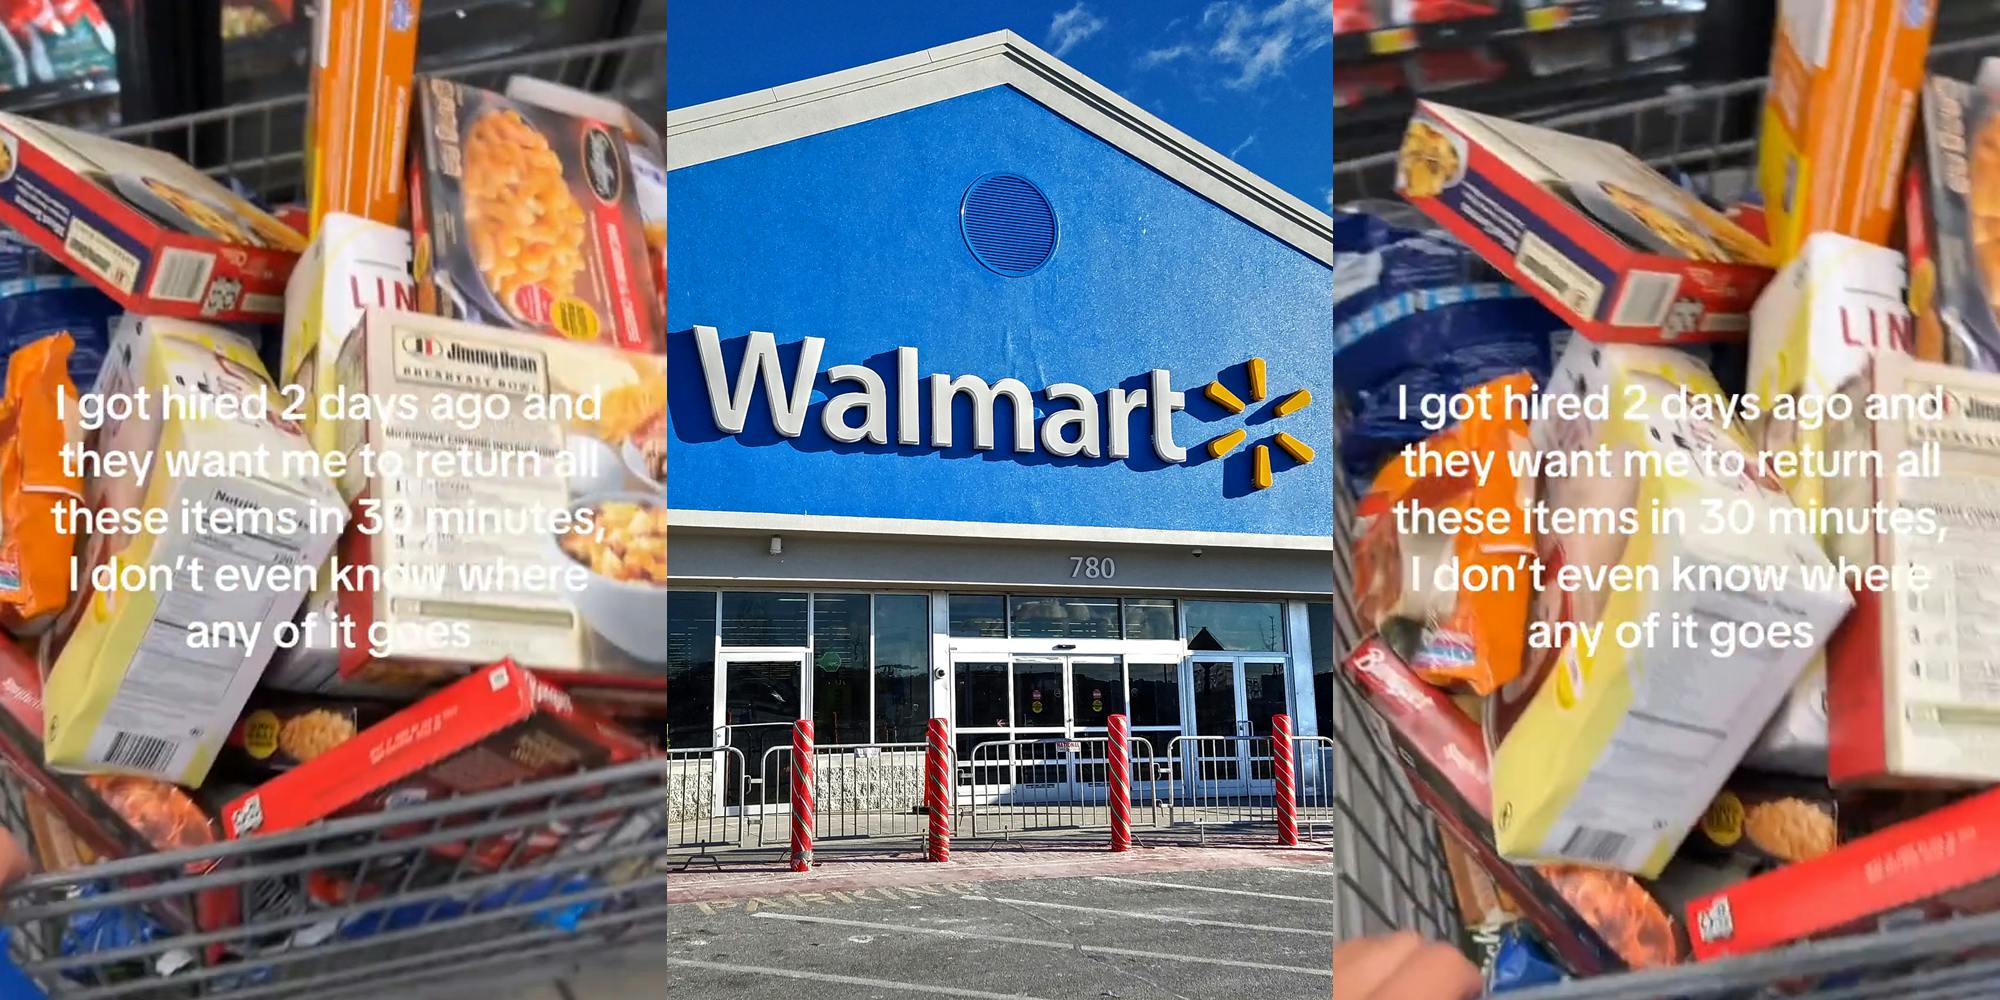 full Walmart cart with caption "I got hired 2 days ago and they want me to return all these items in 30 minutes, I don't even know where any of it goes" (l) Walmart building with sign (c) full Walmart cart with caption "I got hired 2 days ago and they want me to return all these items in 30 minutes, I don't even know where any of it goes" (r)